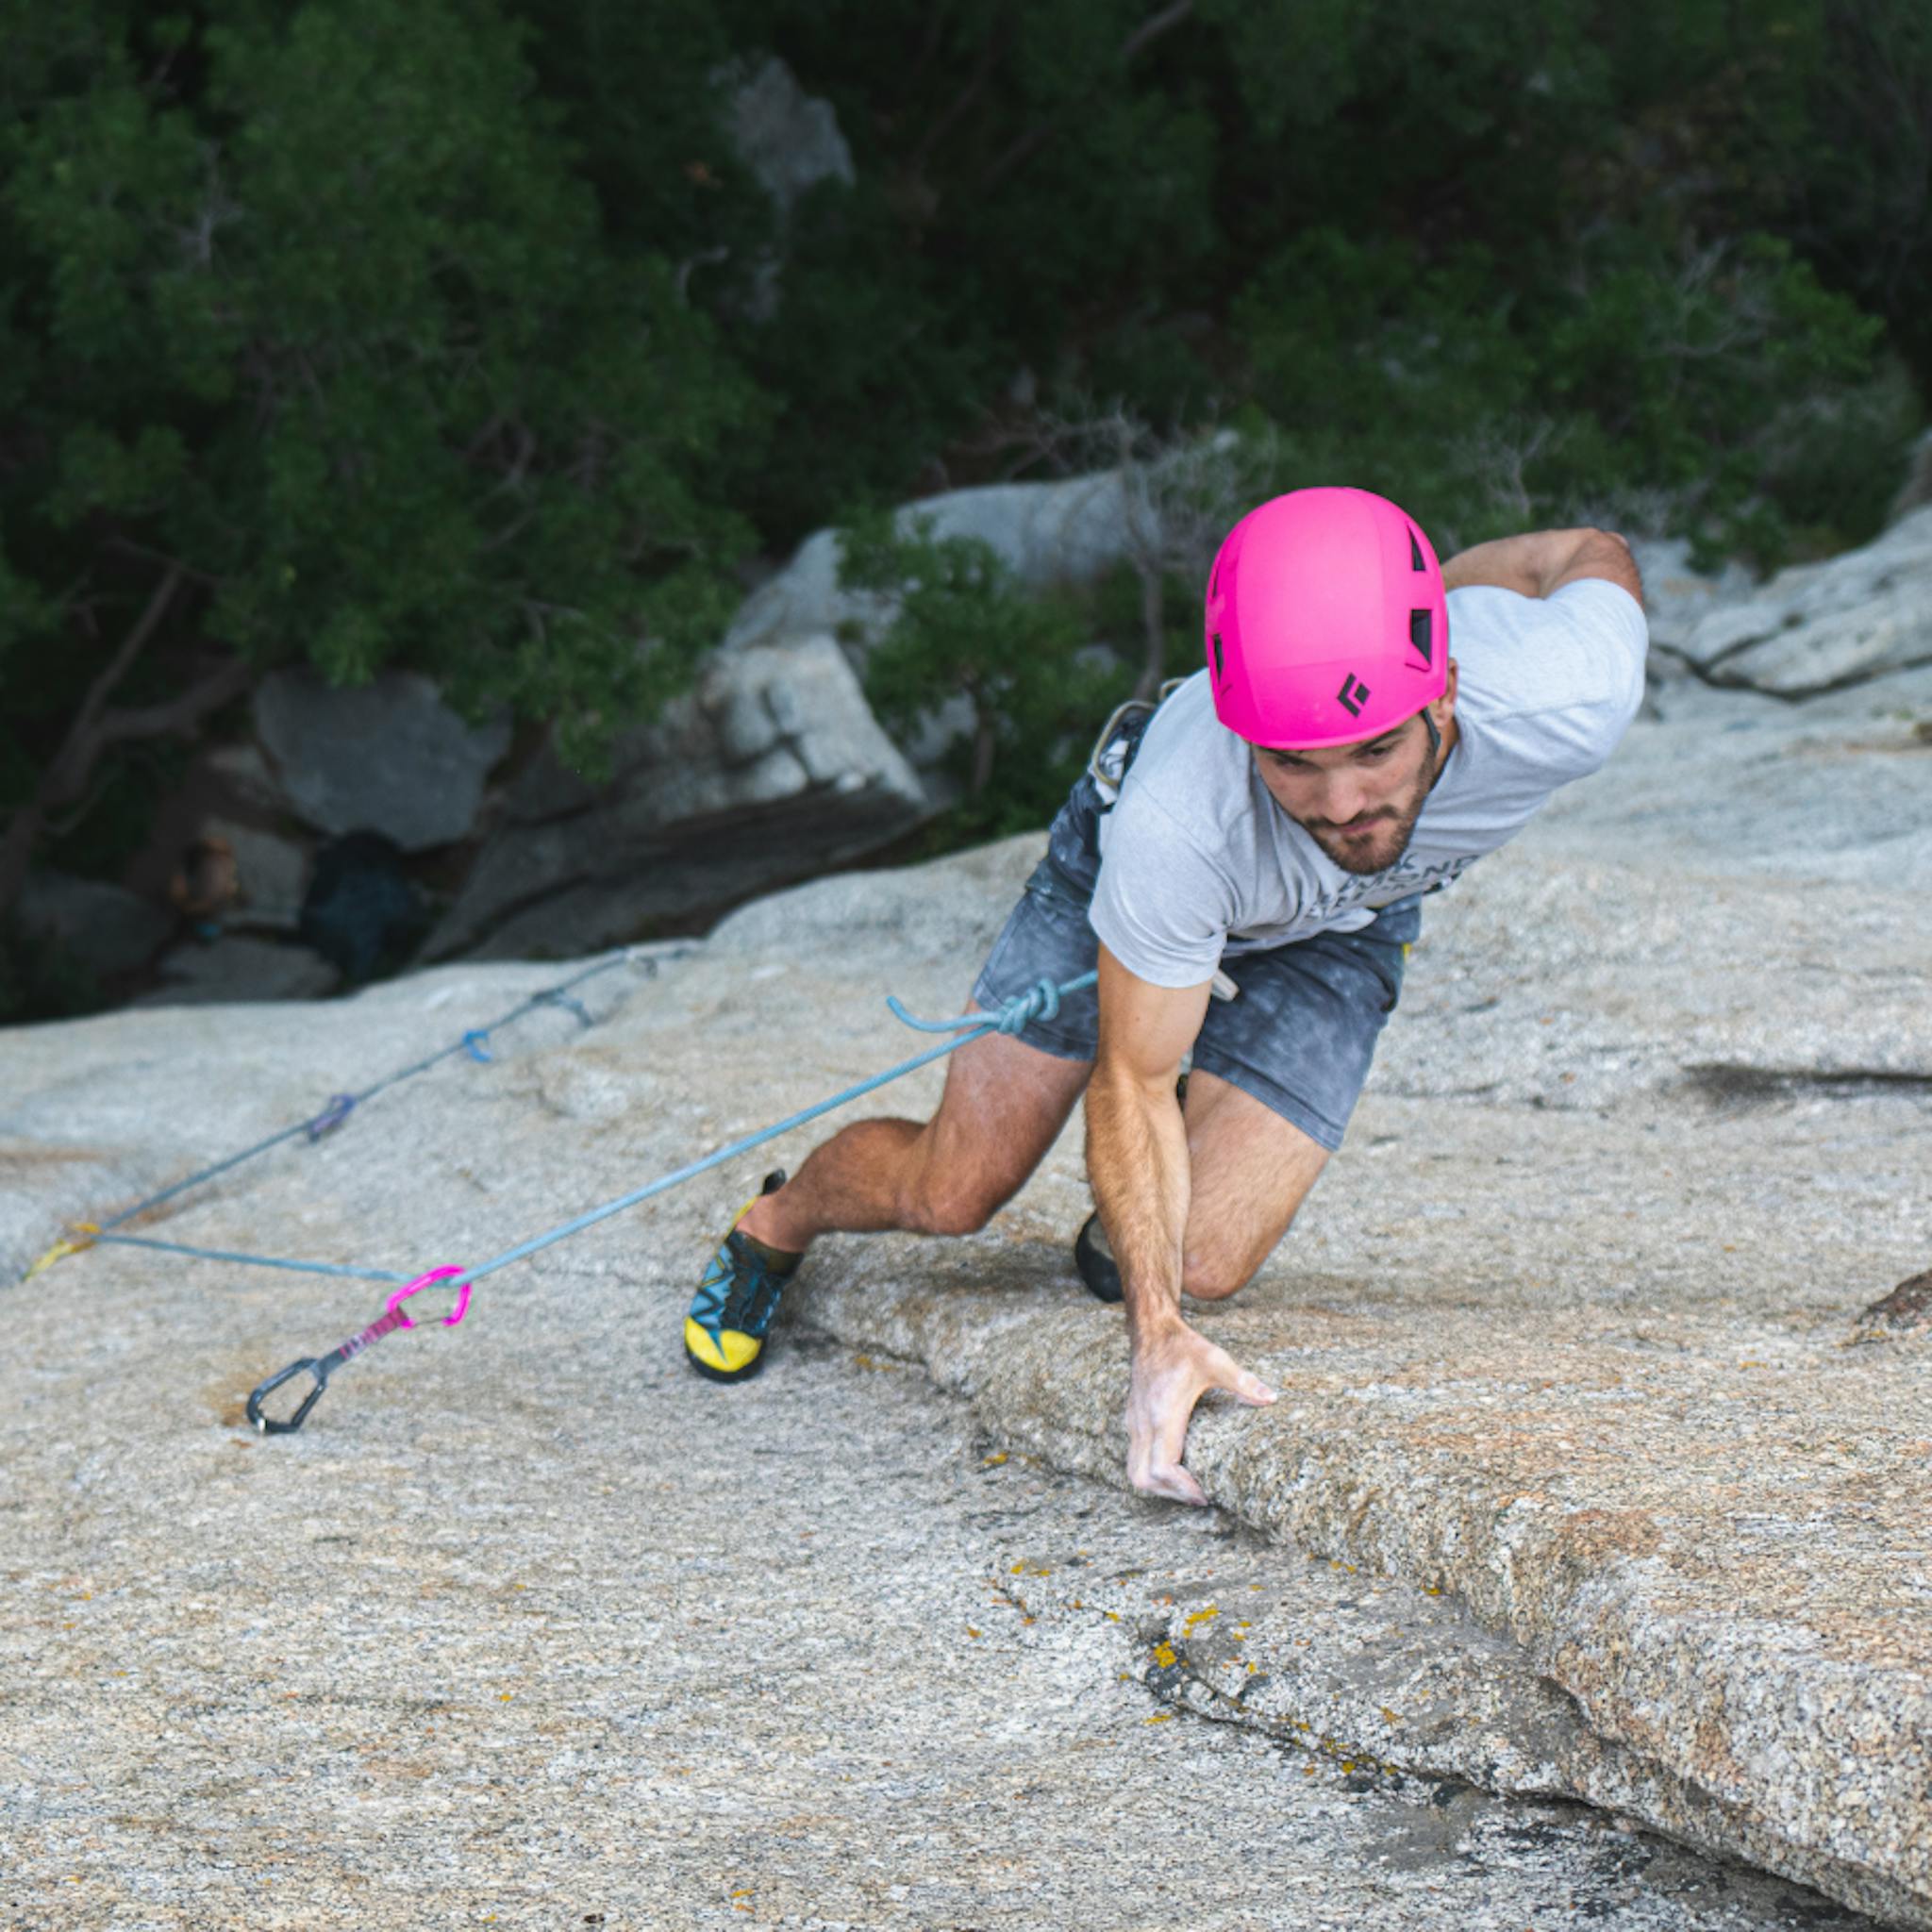 A climber chalks up midway up route wearing a Capitan Helmet.